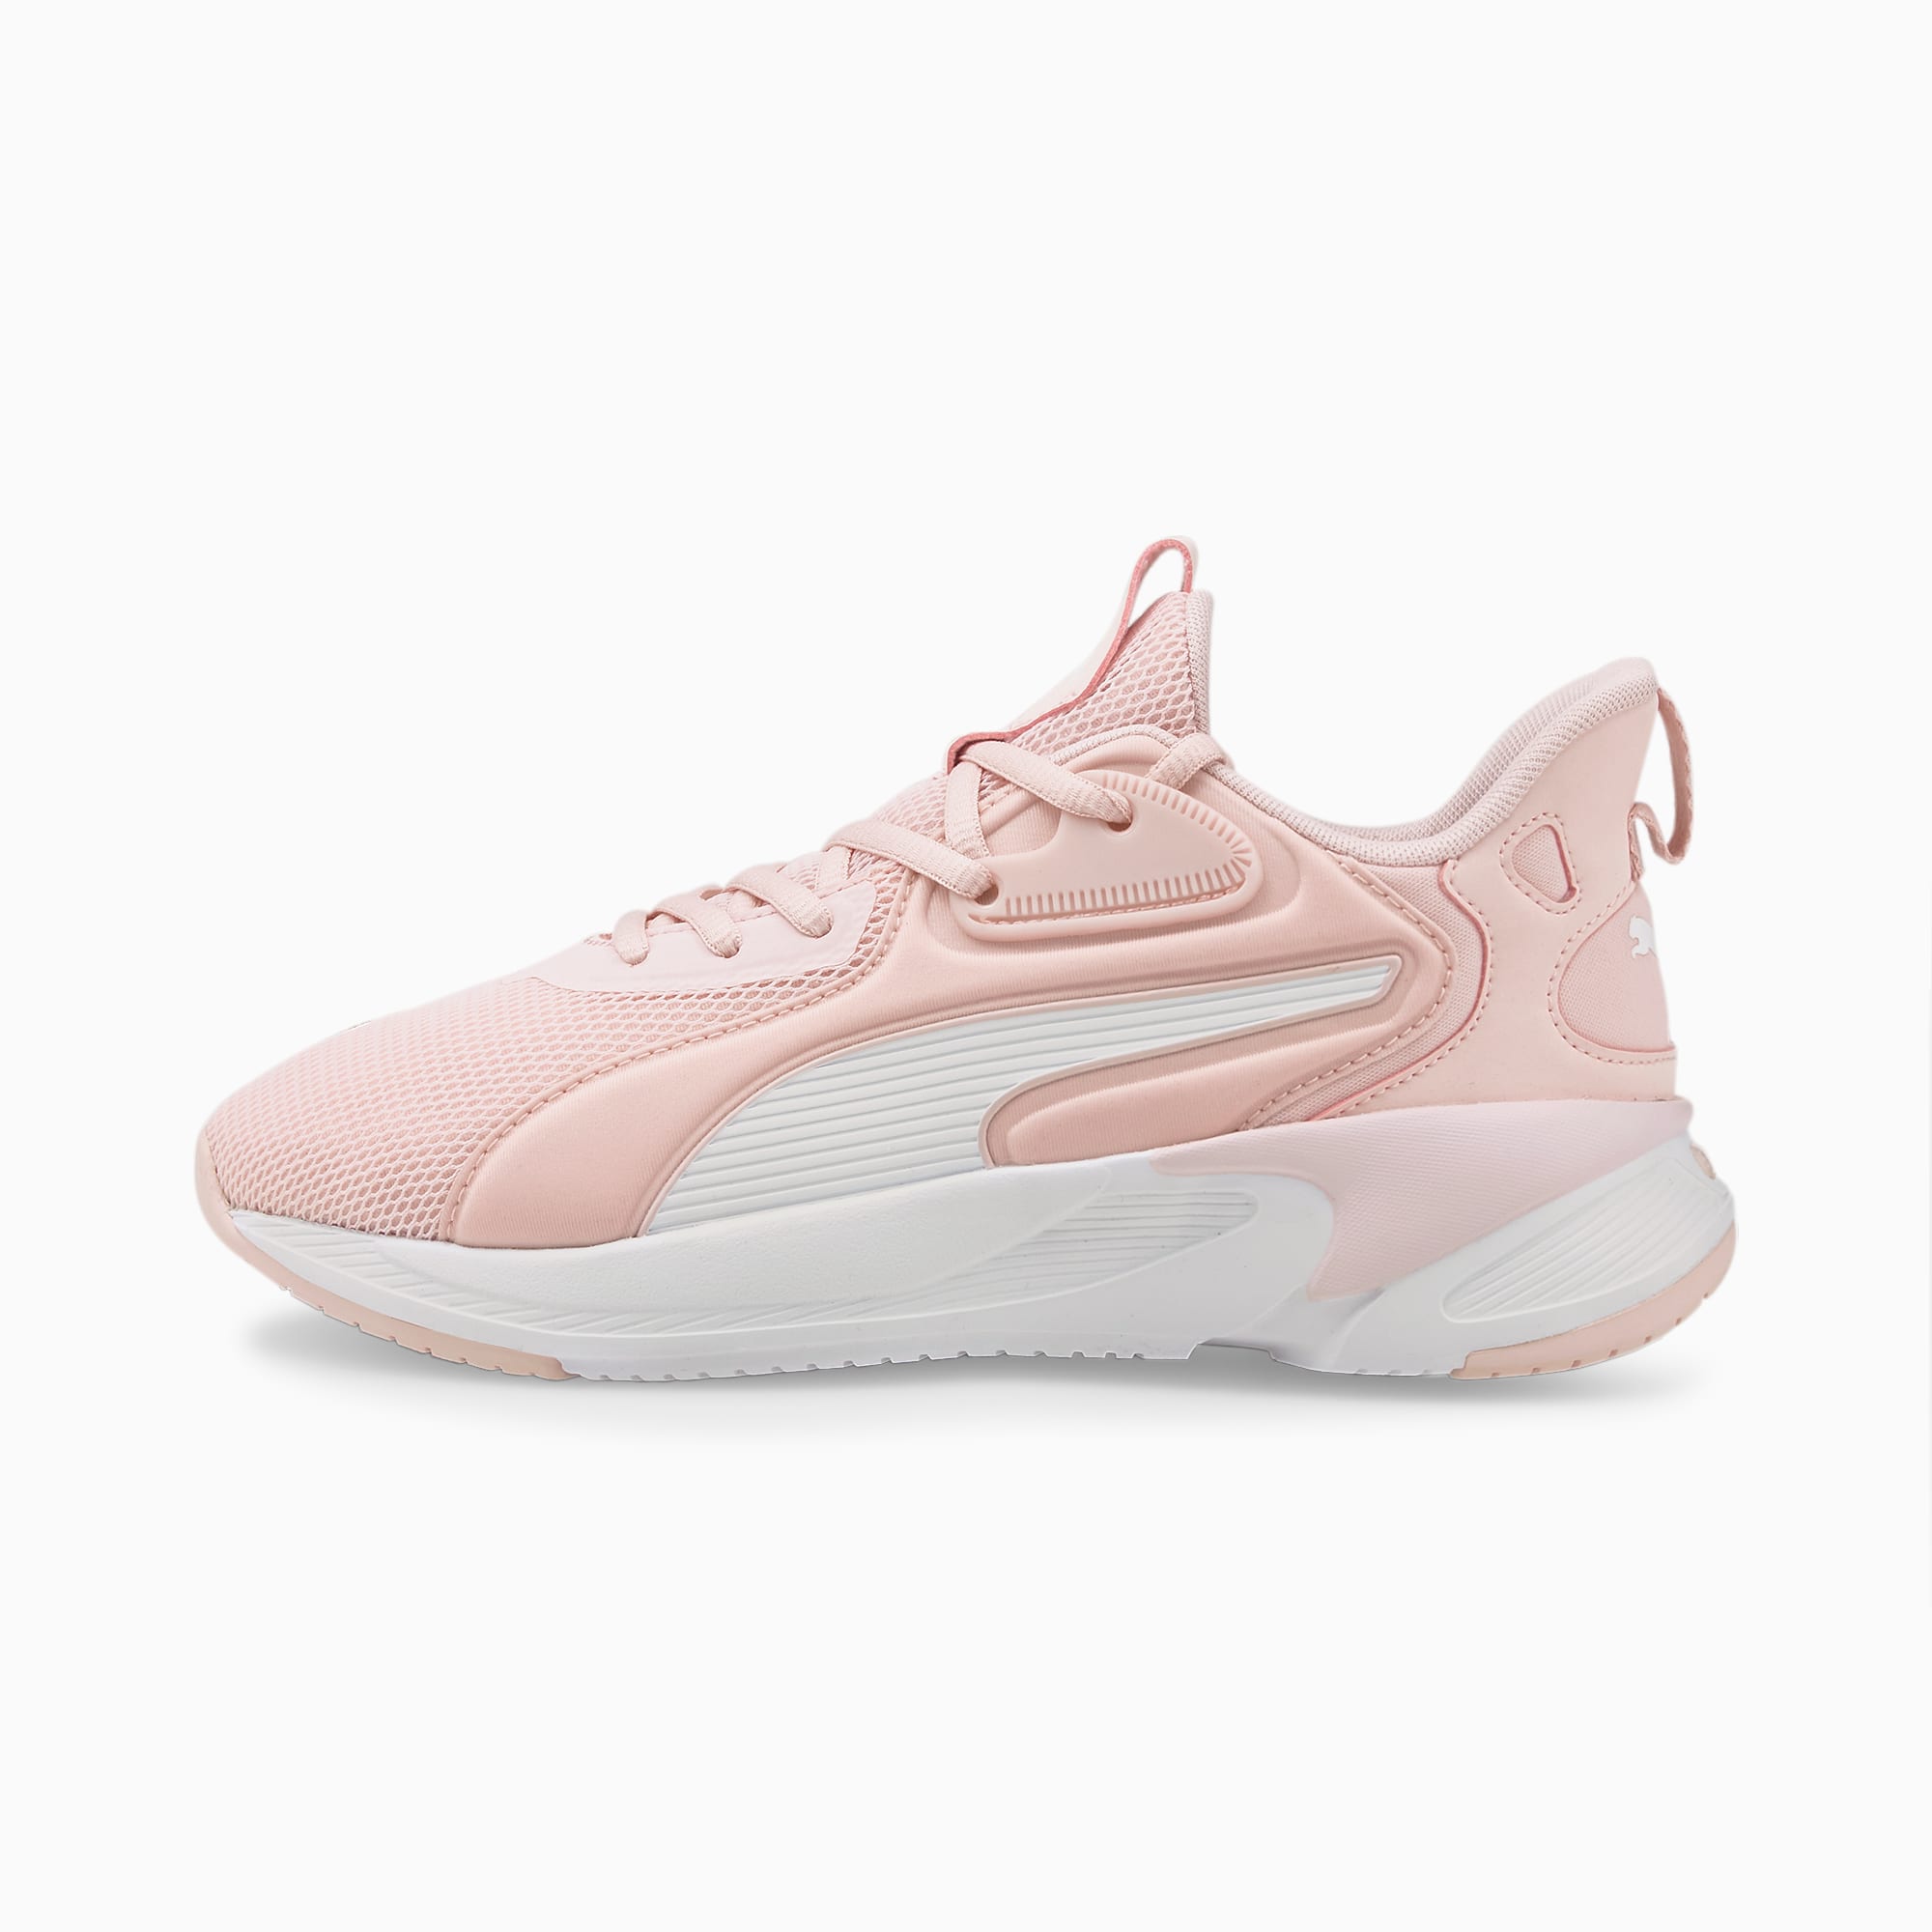 Pink White Puma Tennis Shoes | vlr.eng.br